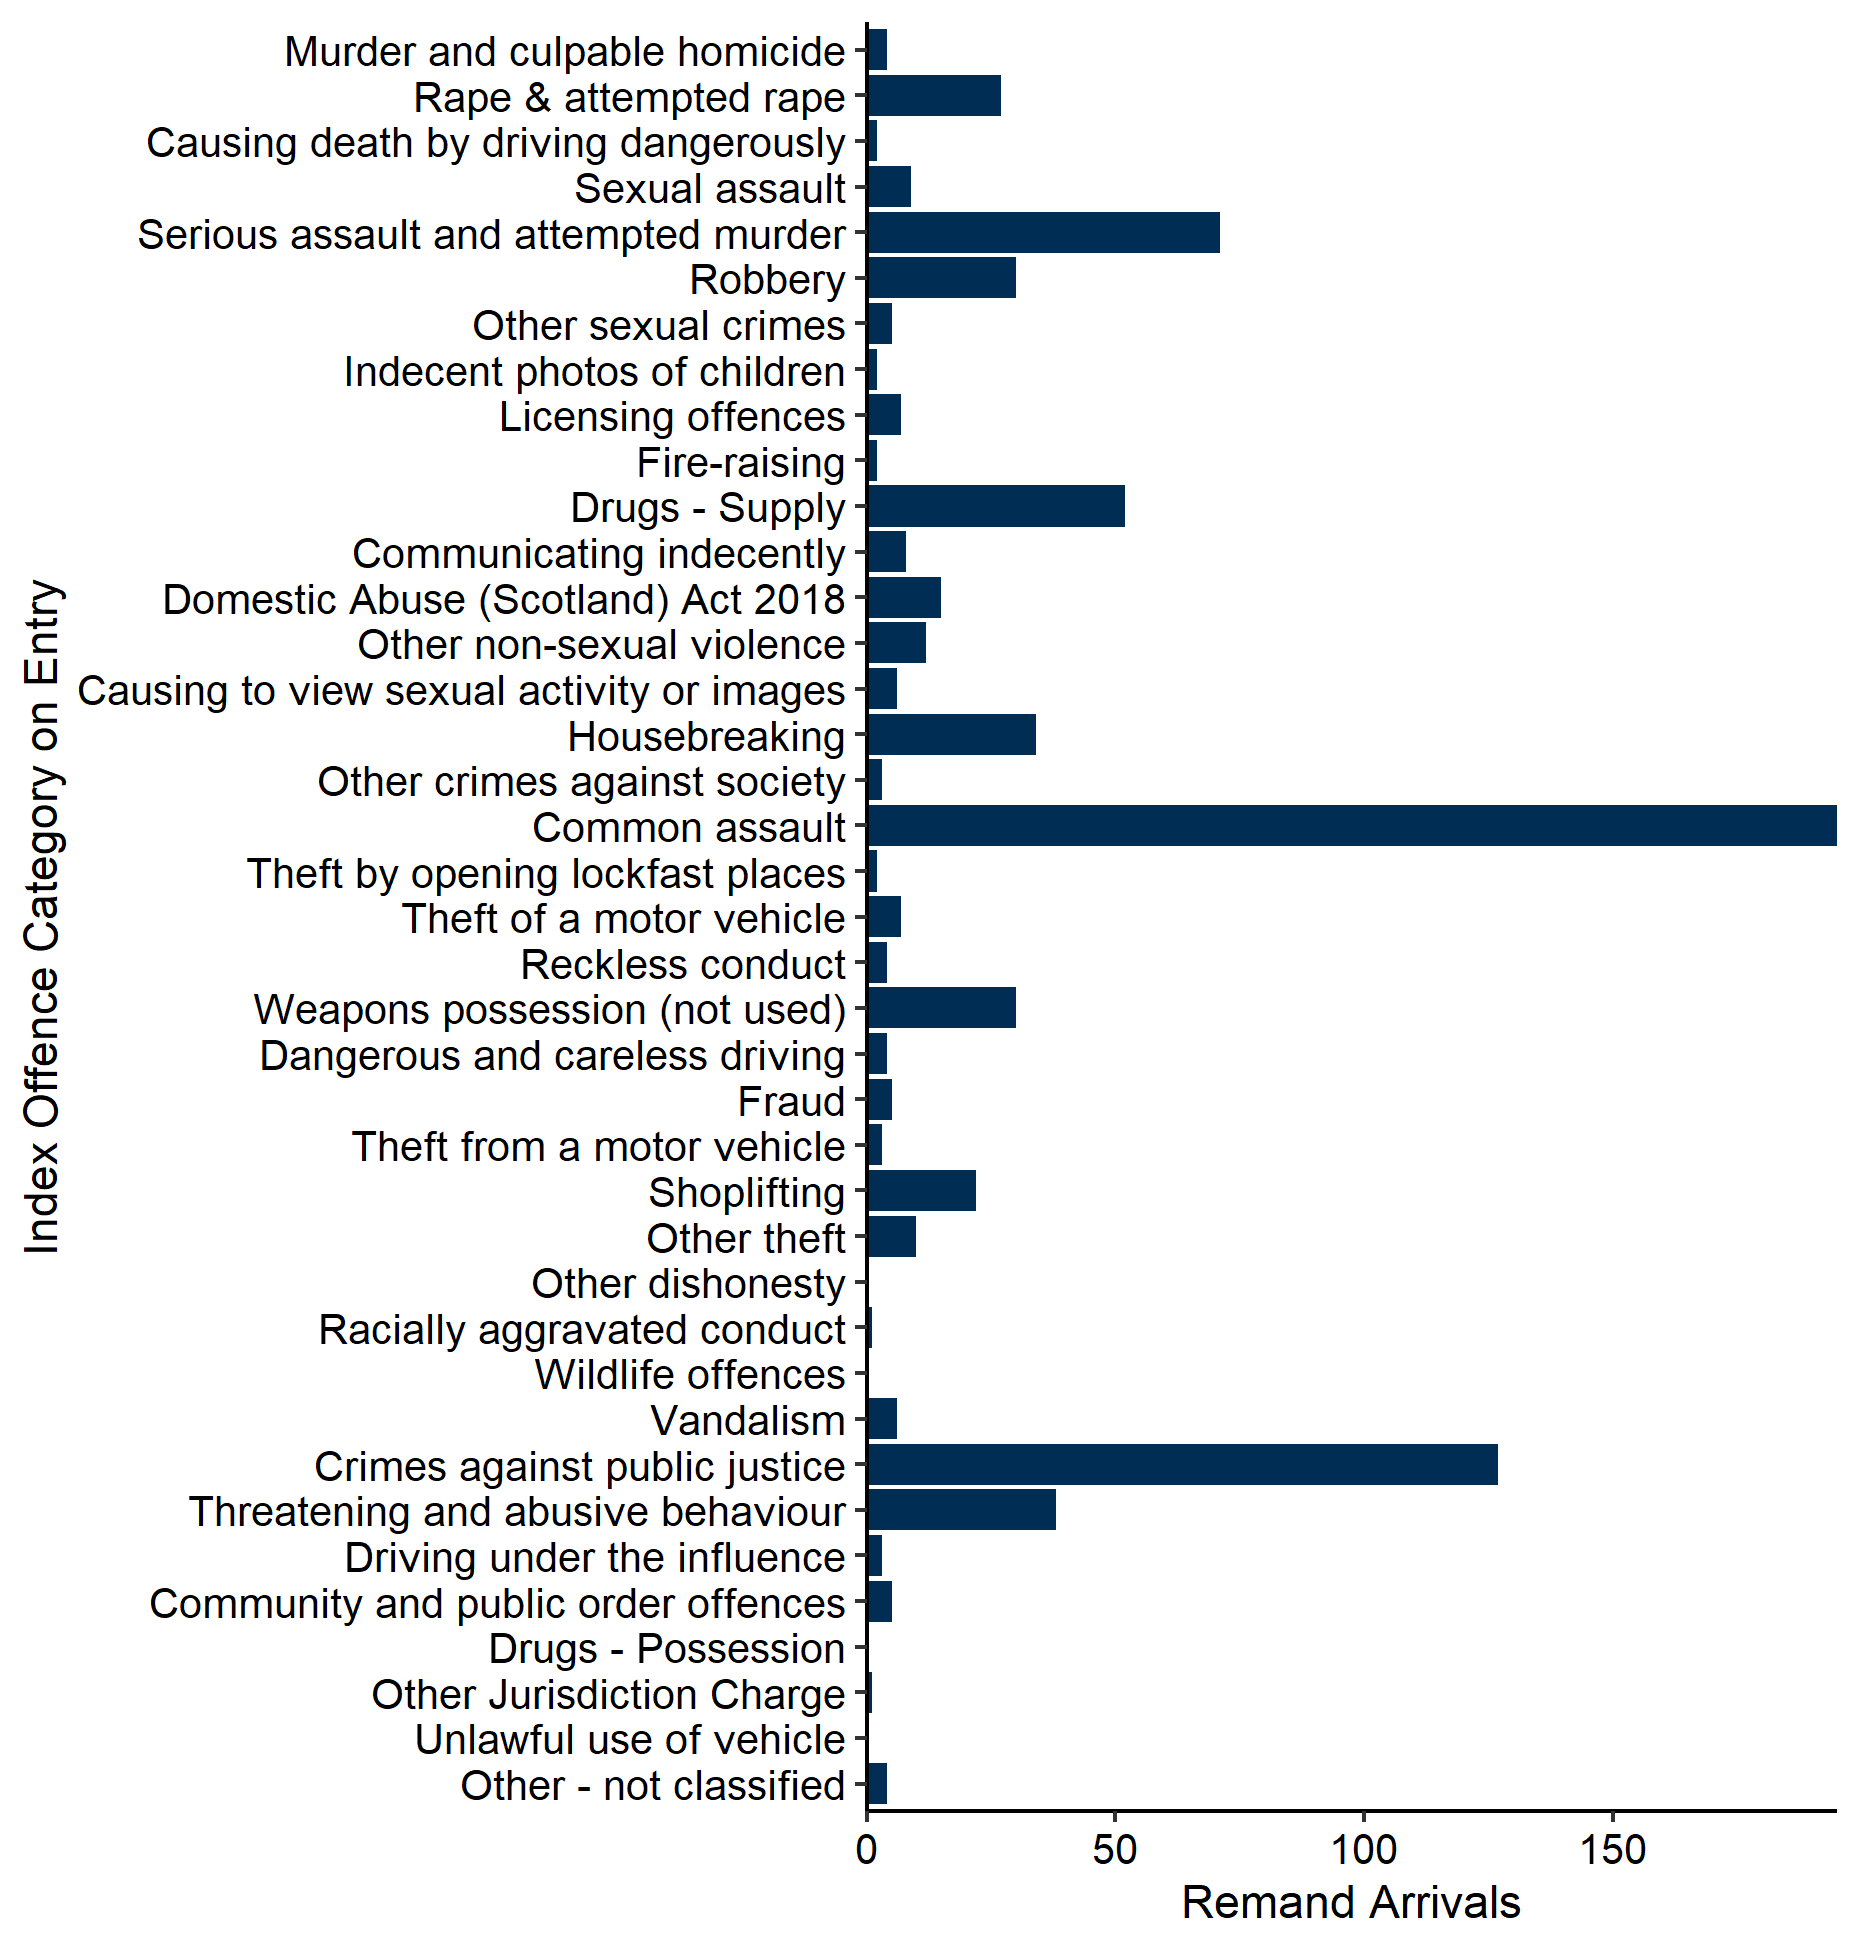 The index offences of the 737 arriving to untried and convicted awaiting sentence legal statuses in January. Most common was common assault (195), followed by crimes against public justice (127), serious assault and attempted murder (71), drugs (supply) (52) and threatening and abusive behaviour (38). Last updated March 2024. Next update due April 2024.